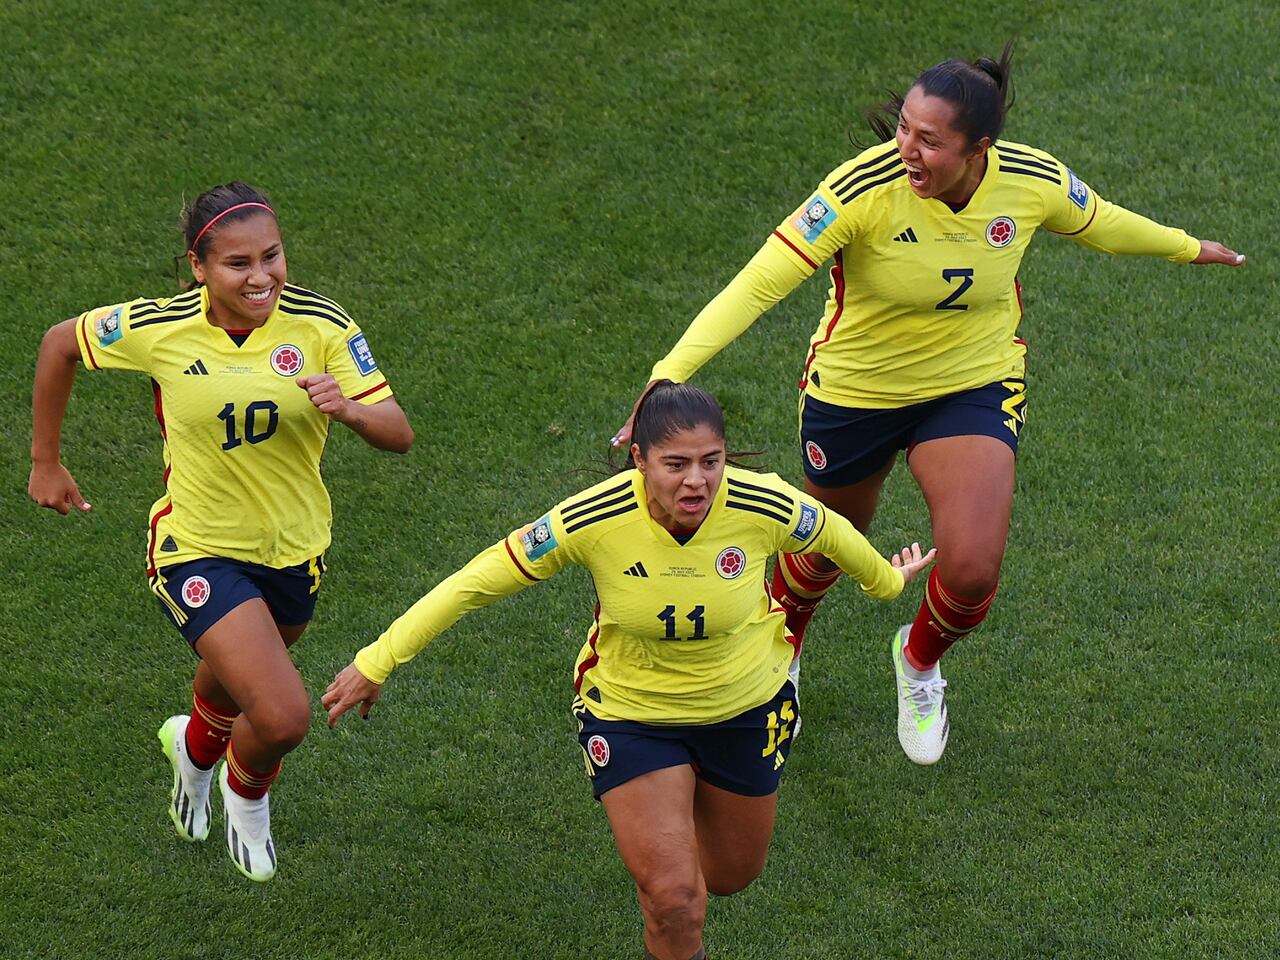 SYDNEY, AUSTRALIA - JULY 25: Catalina Usme (C) of Colombia celebrates with teammates Leicy Santos (L) and Manuela Vanegas (R) after scoring her team's first goal during the FIFA Women's World Cup Australia & New Zealand 2023 Group H match between Colombia and Korea Republic at Sydney Football Stadium on July 25, 2023 in Sydney / Gadigal, Australia. (Photo by James Chance/Getty Images)